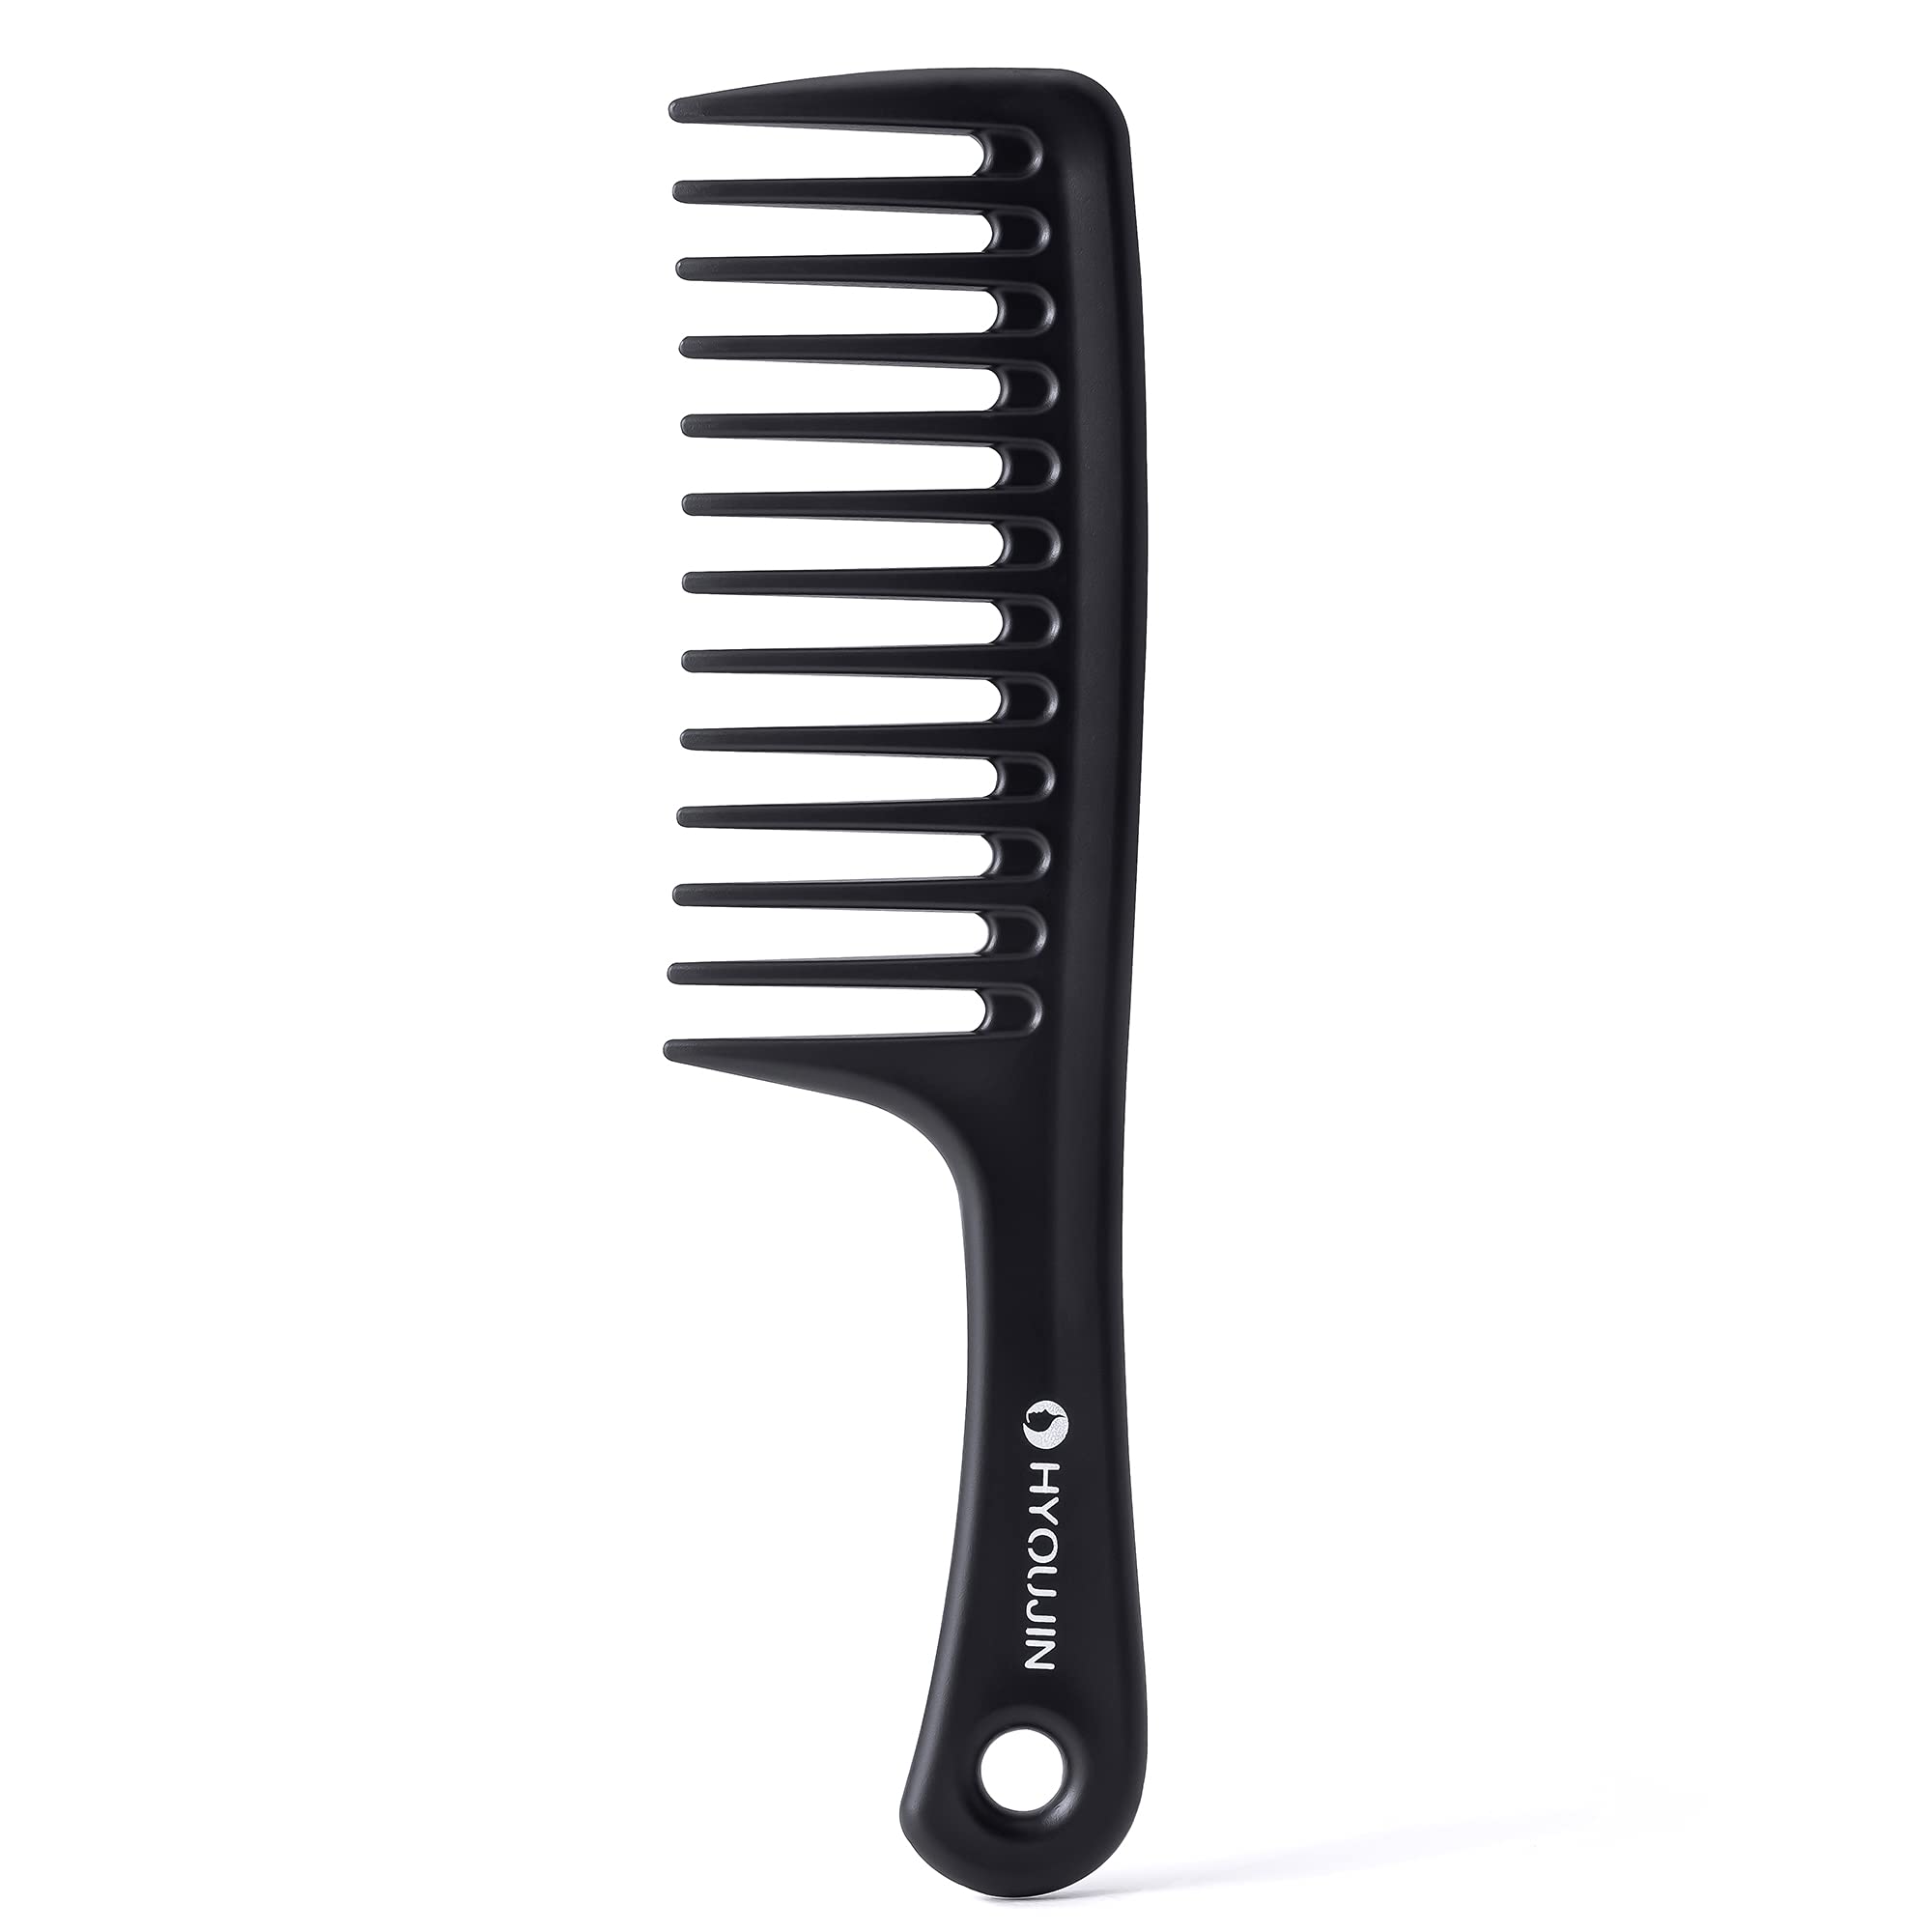 A wide tooth hair comb